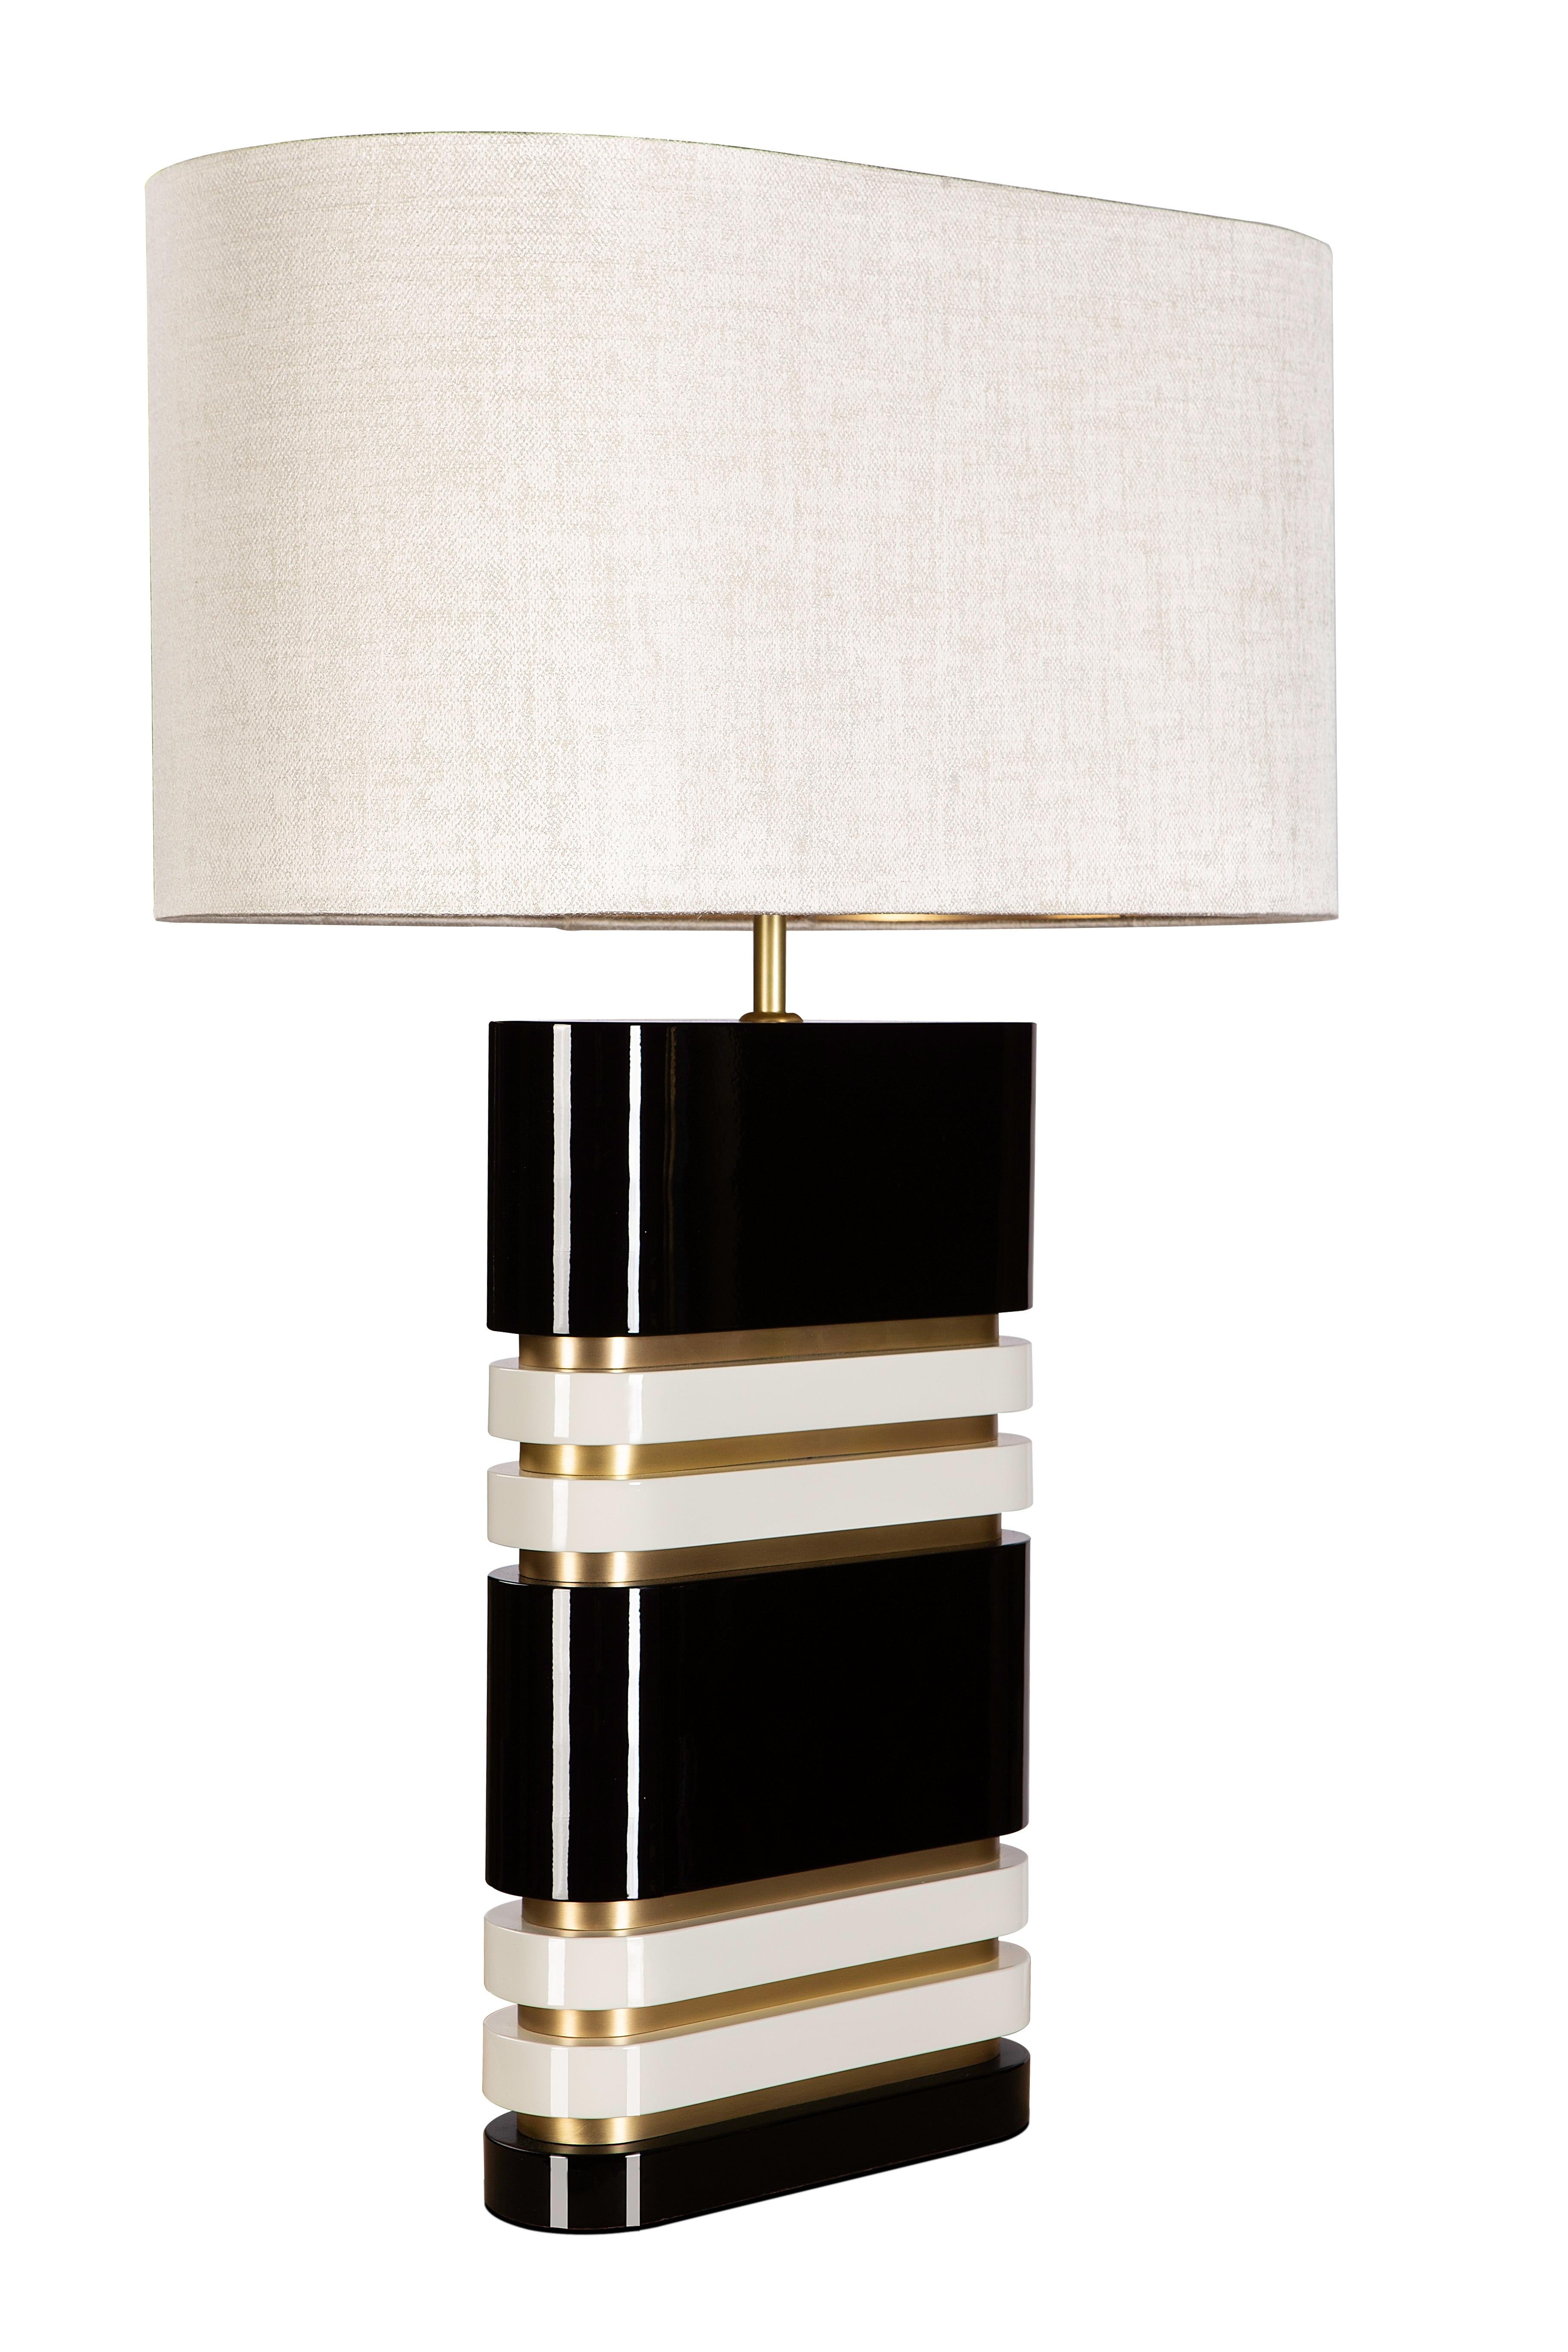 Nuit Table Lamp by Memoir Essence
Dimensions: D 25 x W 50 x H 70 cm.
Materials: Brushed brass, high gloss lacquer and satin fabric.

Nuit table lamp is a classic and elegant solution for your living room or bedroom. Its shaped silhouette and color